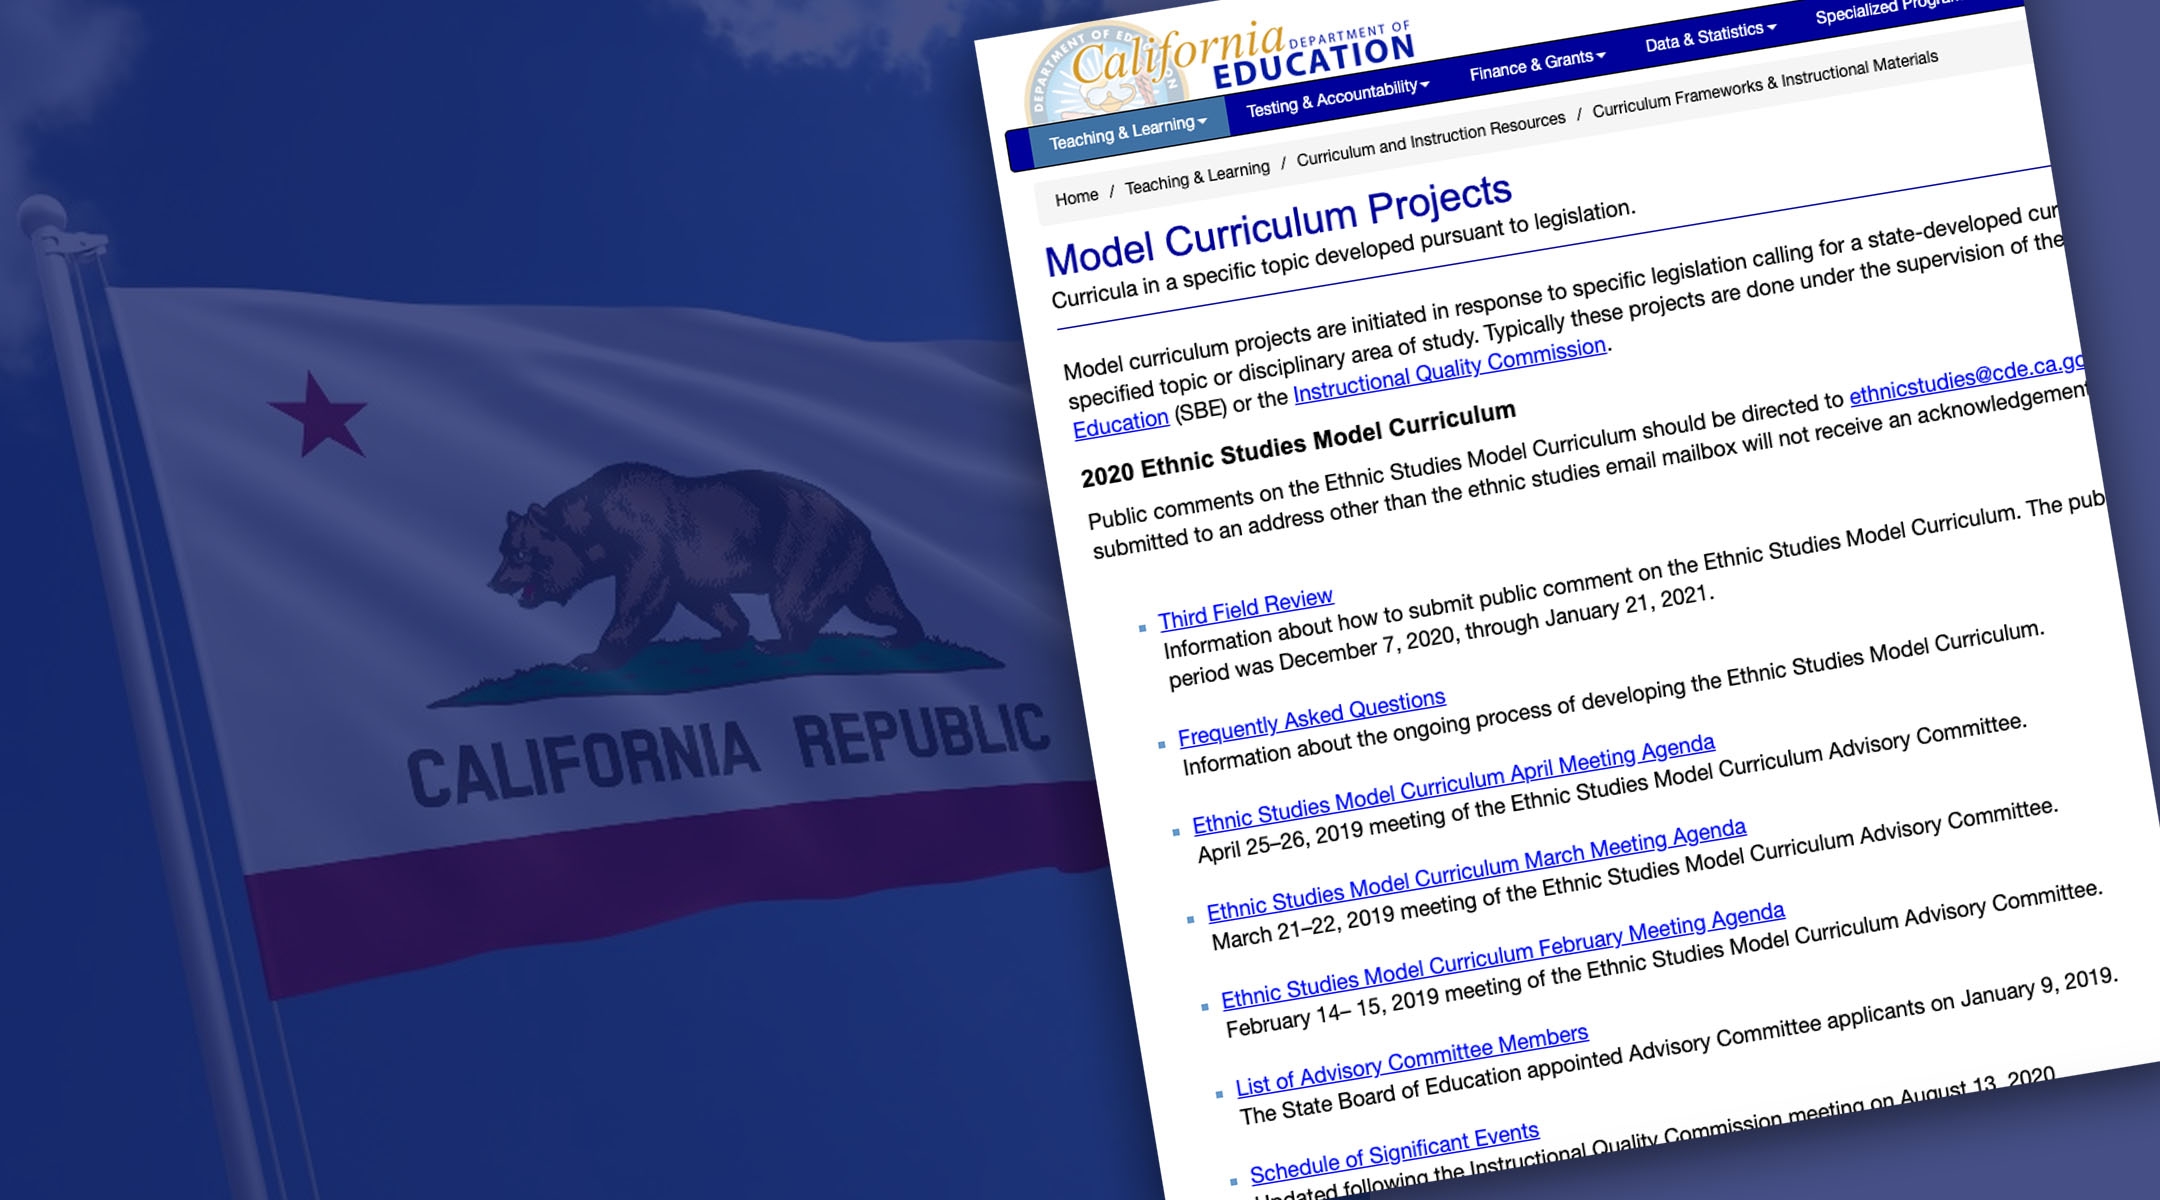 A schedule of events related to California’s Ethnic Studies Model Curriculum with the state flag in the background. (JTA montage)